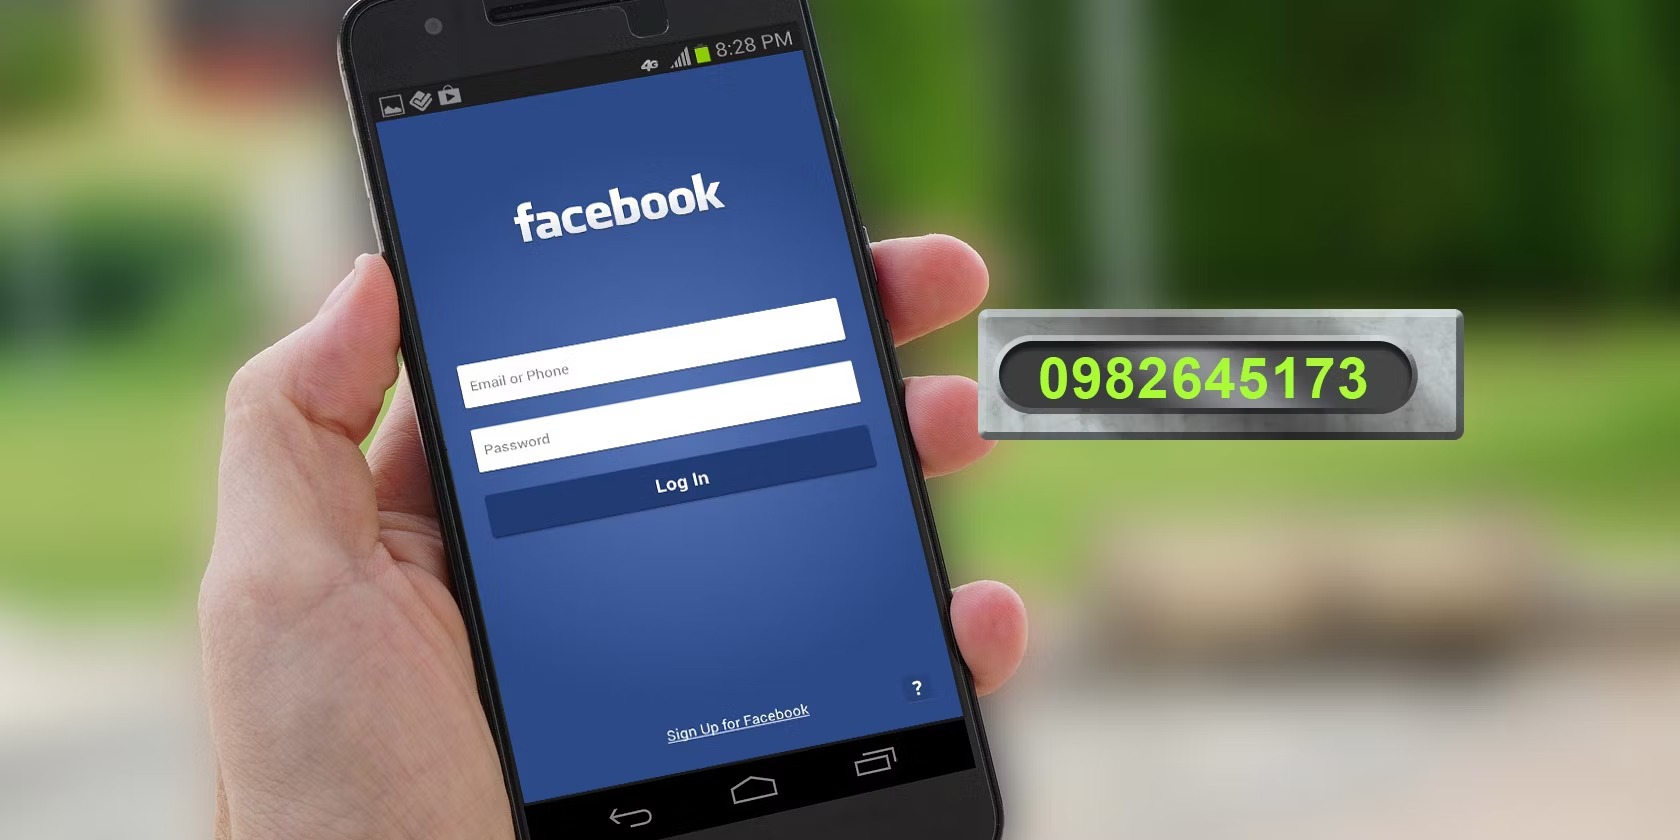 What To Do When Facebook Isn’t Sending Security Codes